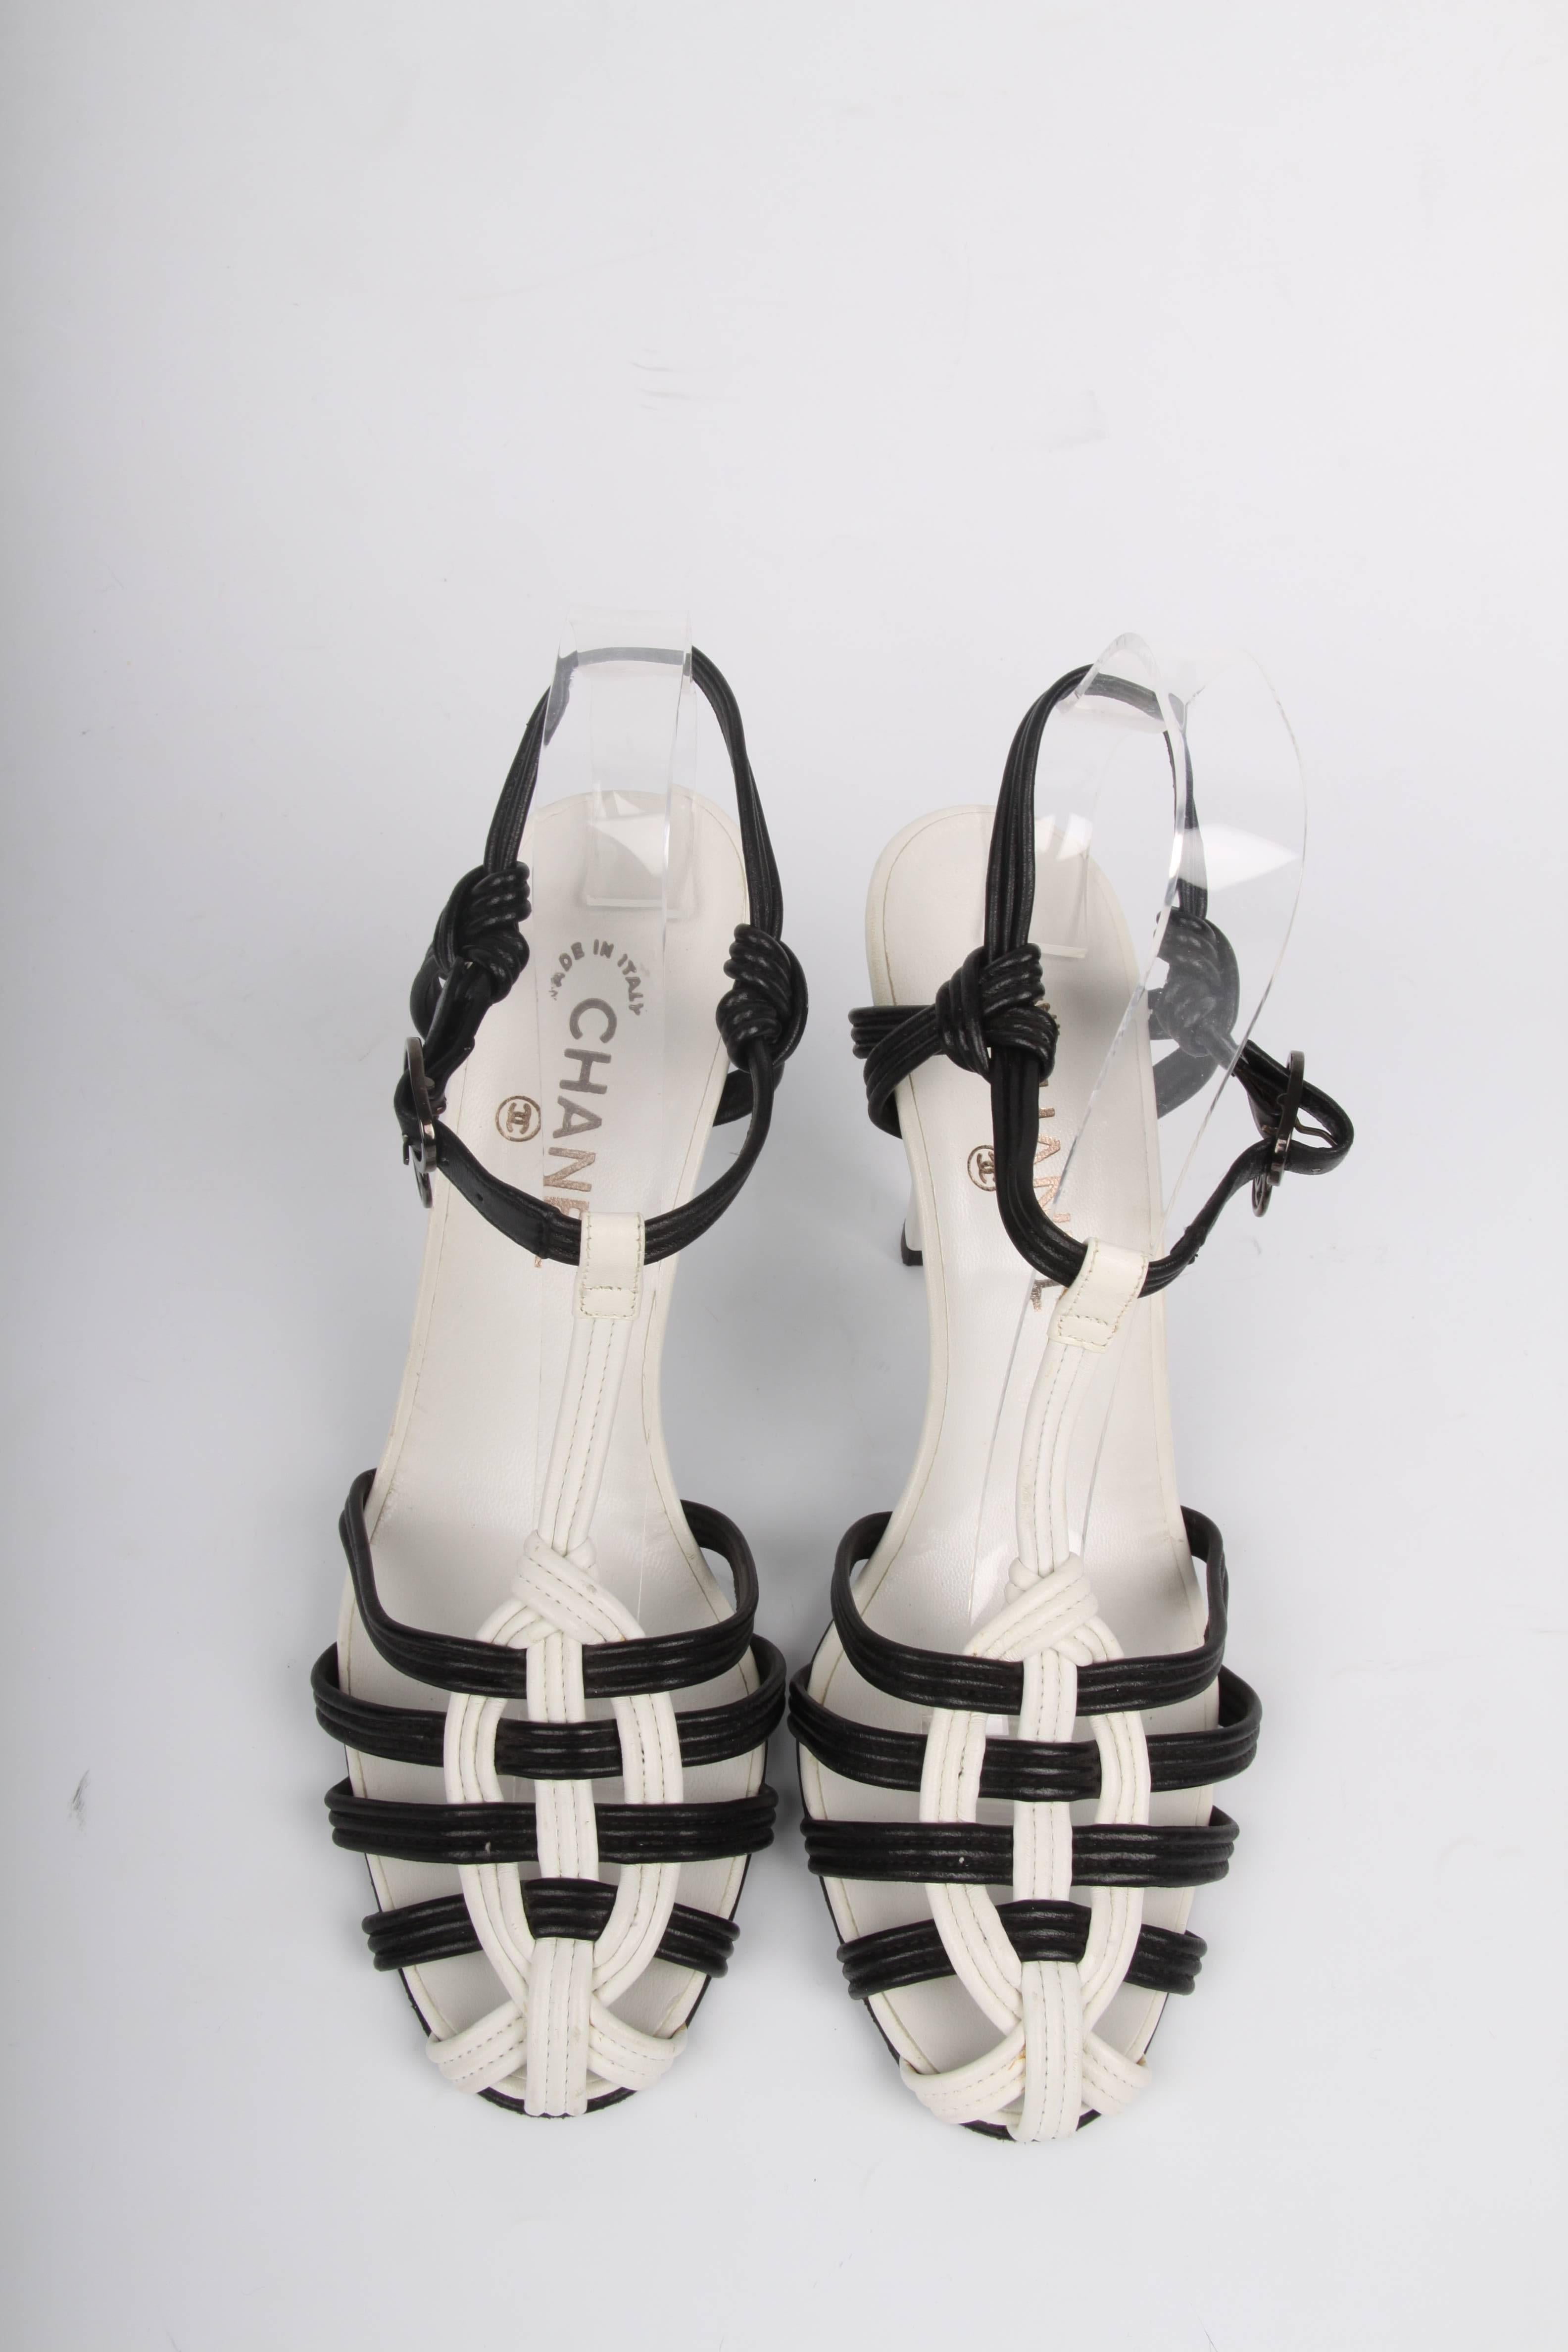 Black and white is always chic! Look at these high heeled sandals by Chanel.

A striped heel that measures 11 centimeters, no platform. Narrow white straps on the instep and a vertical black patent leather patch. A long strap to tie around the